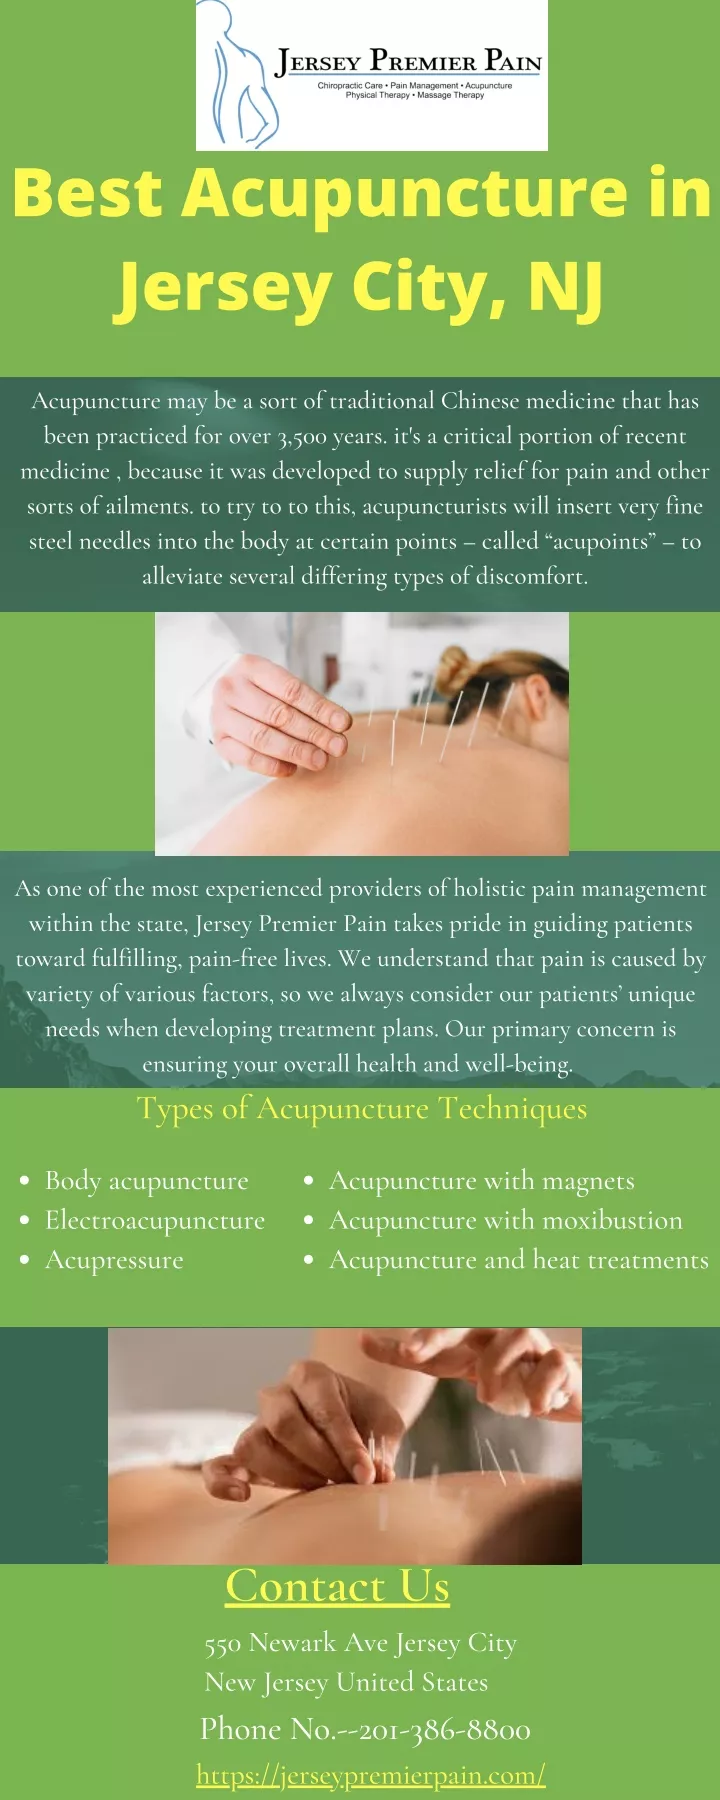 best acupuncture in jersey city nj